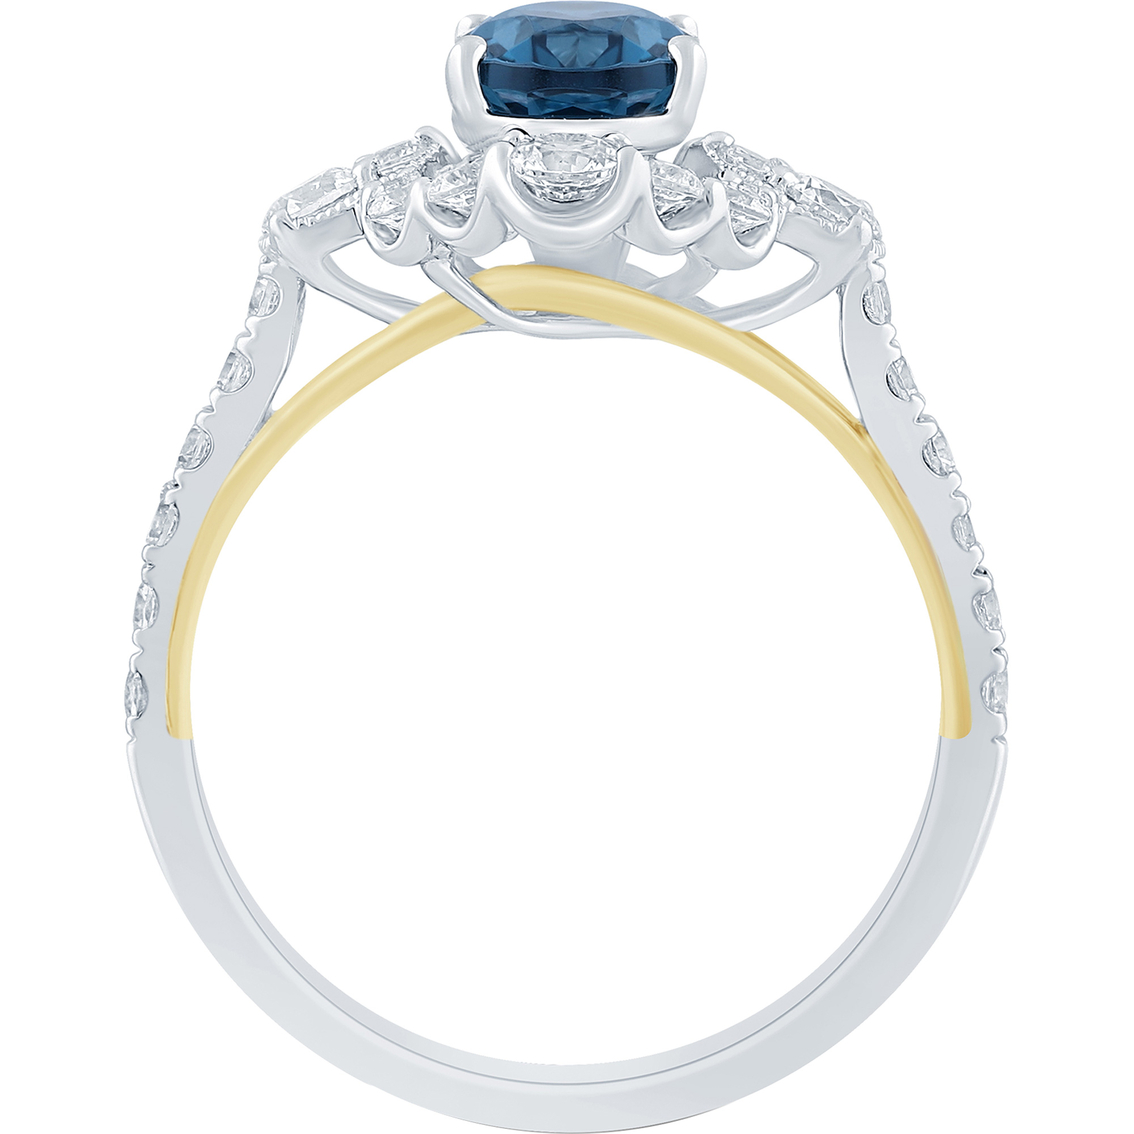 Truly Zac Posen 14K Two Tone Gold 3/4 CTW Diamond and London Blue Engagement Ring - Image 3 of 3